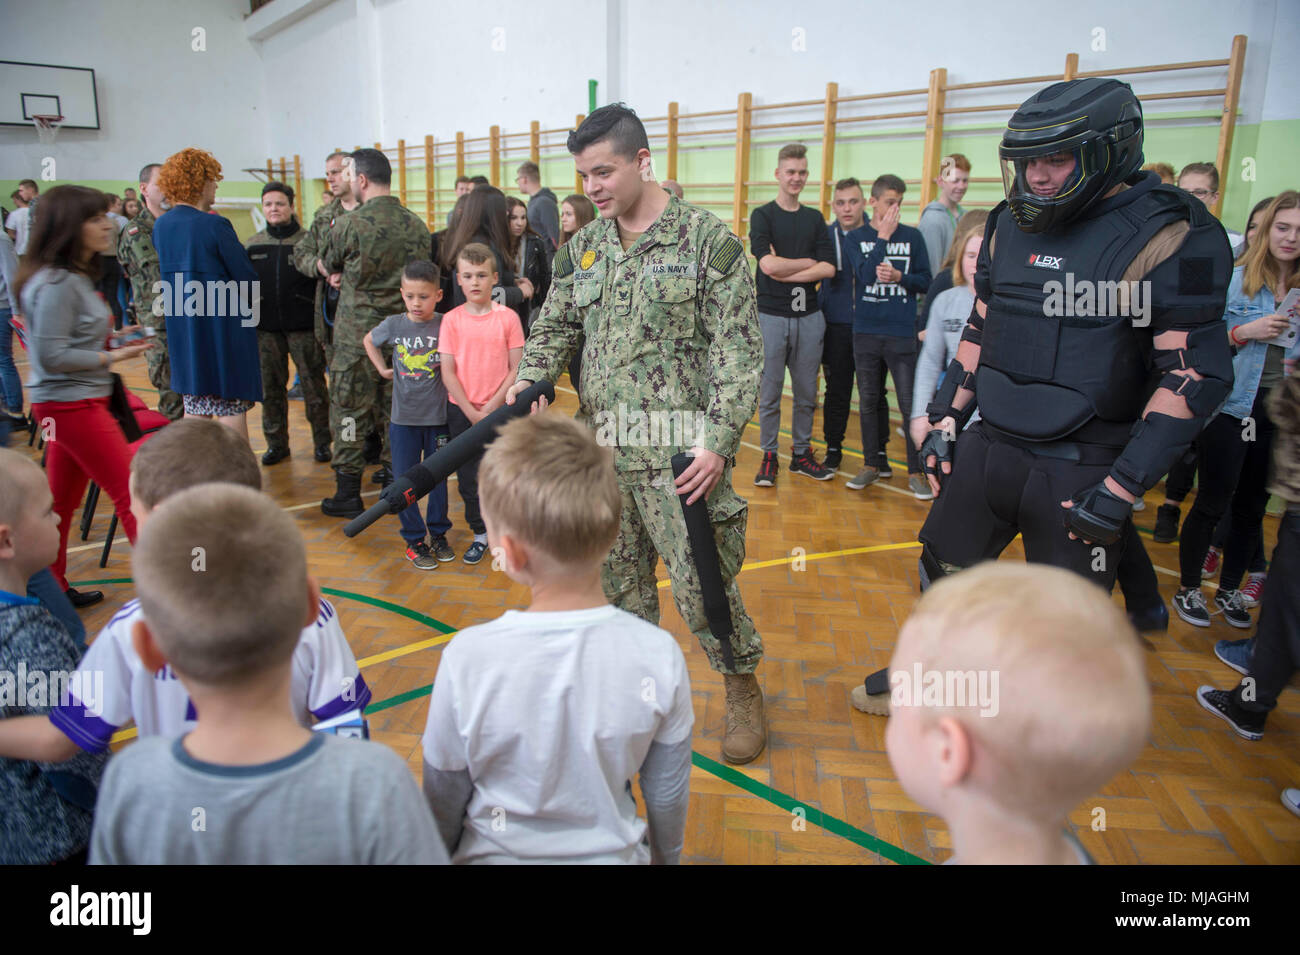 180425-N-ST458-0474 REDZIKOWO (Apr. 25, 2018) Naval Support Facility (NSF) Redzikowo sailors interact with students and host a military display at the open day event at the School Complex in Redzikowo-Osiedle. NSF Redzikowo is the Navy™s newest installation, and the first U.S. installation in Poland. Its operations enable the responsiveness of U.S. and allied forces in support of Navy Region Europe, Africa, Southwest Asia™s (NAVEURAFSWA) mission to provide services to the Fleet, Fighter, and Family. (U.S. Navy photo by Lt. Josie Lynne Lenny/Released) Stock Photo